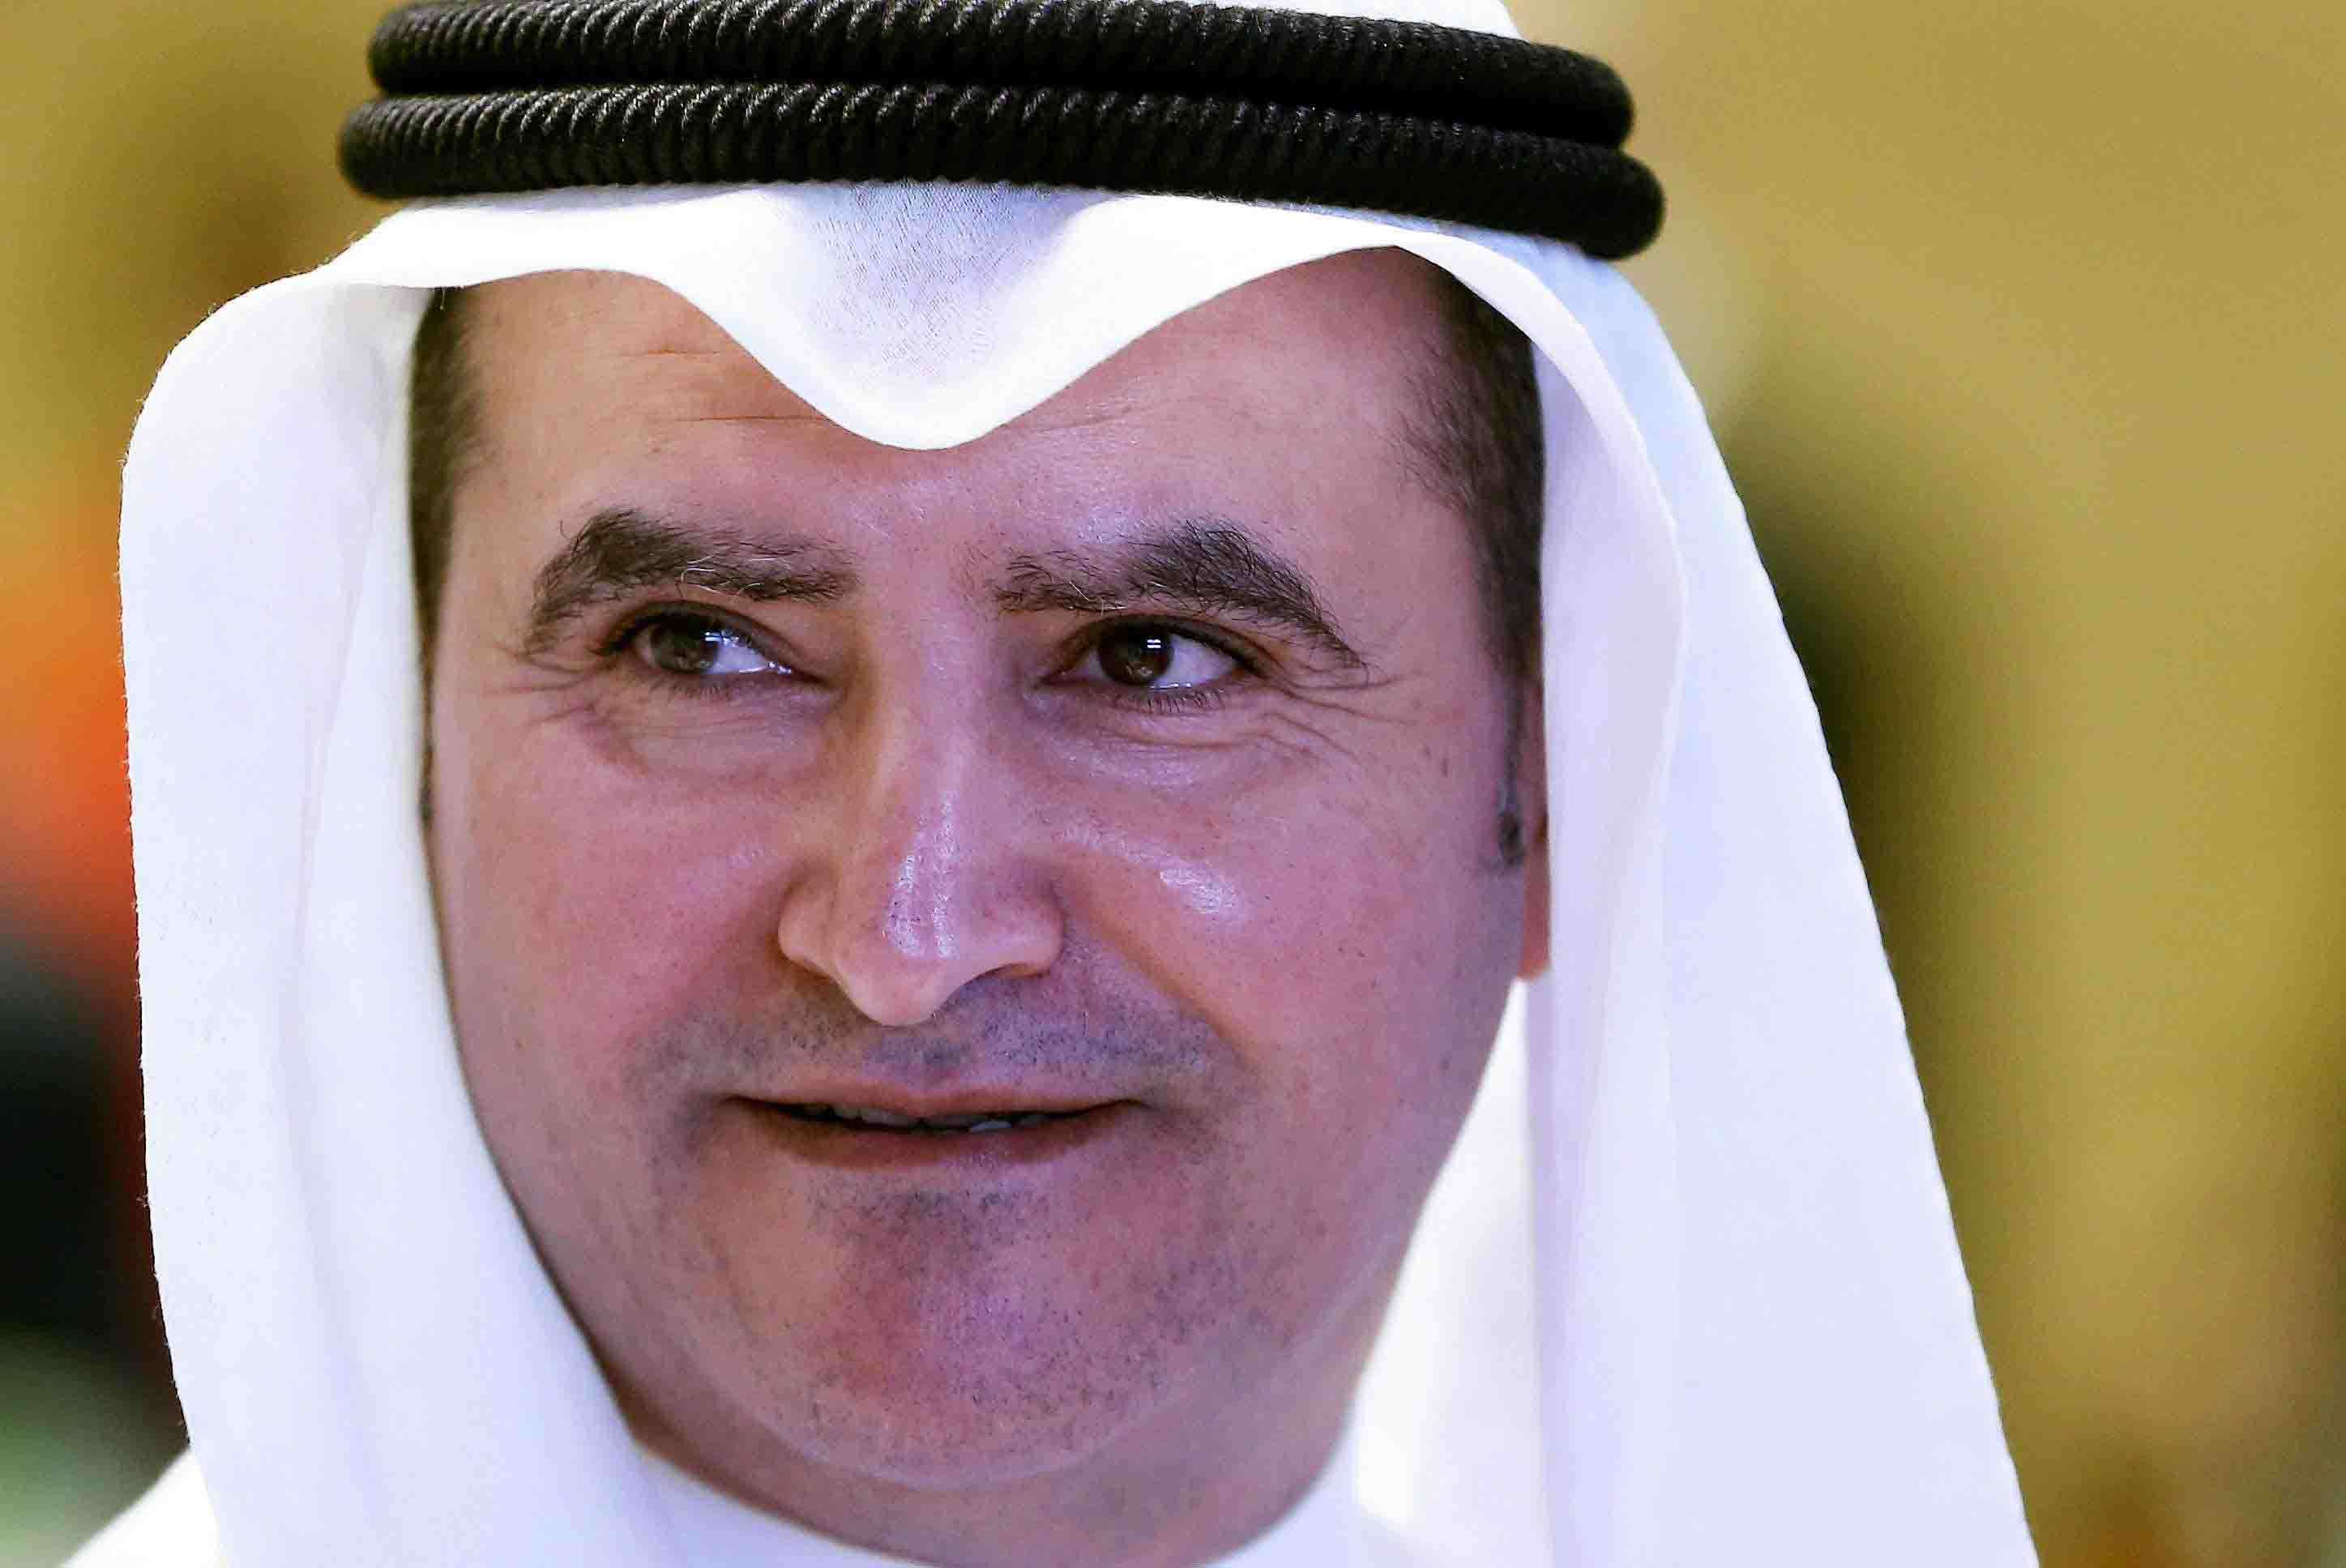 Issam Al-Marzooq Kuwaiti chairman of the board at the Kuwait Petroleum Corporation whose single claim led to UN compensation